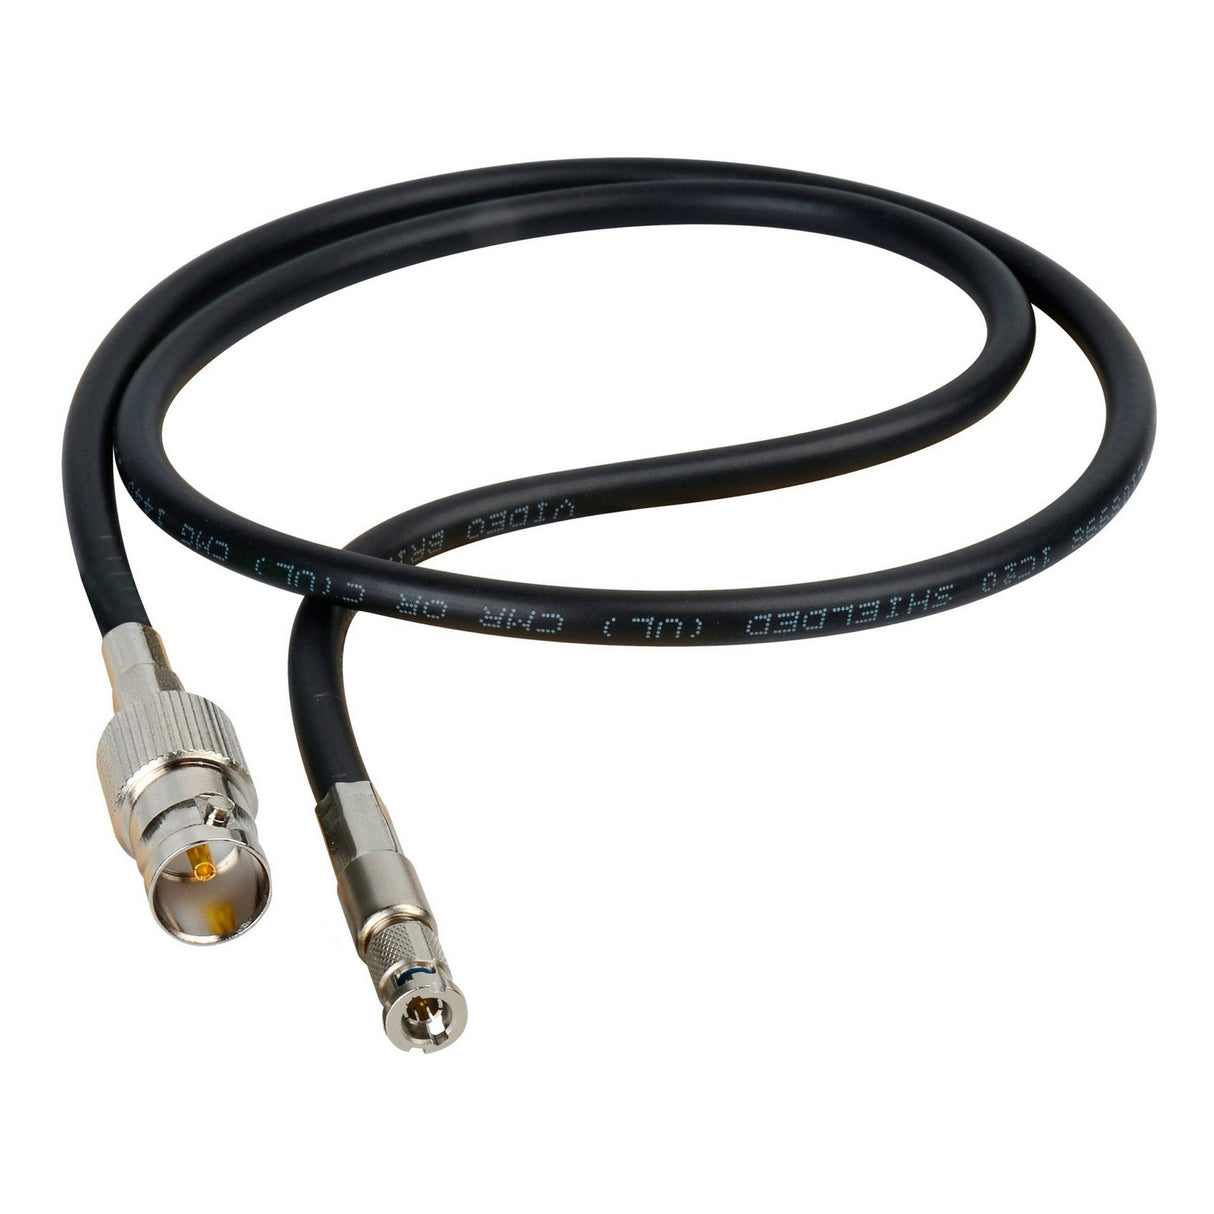 Laird HDBNC1505-BF01 Belden 1505A RG59 HD-BNC Male to BNC Female 6G/HD-SDI Cable, 1 Foot